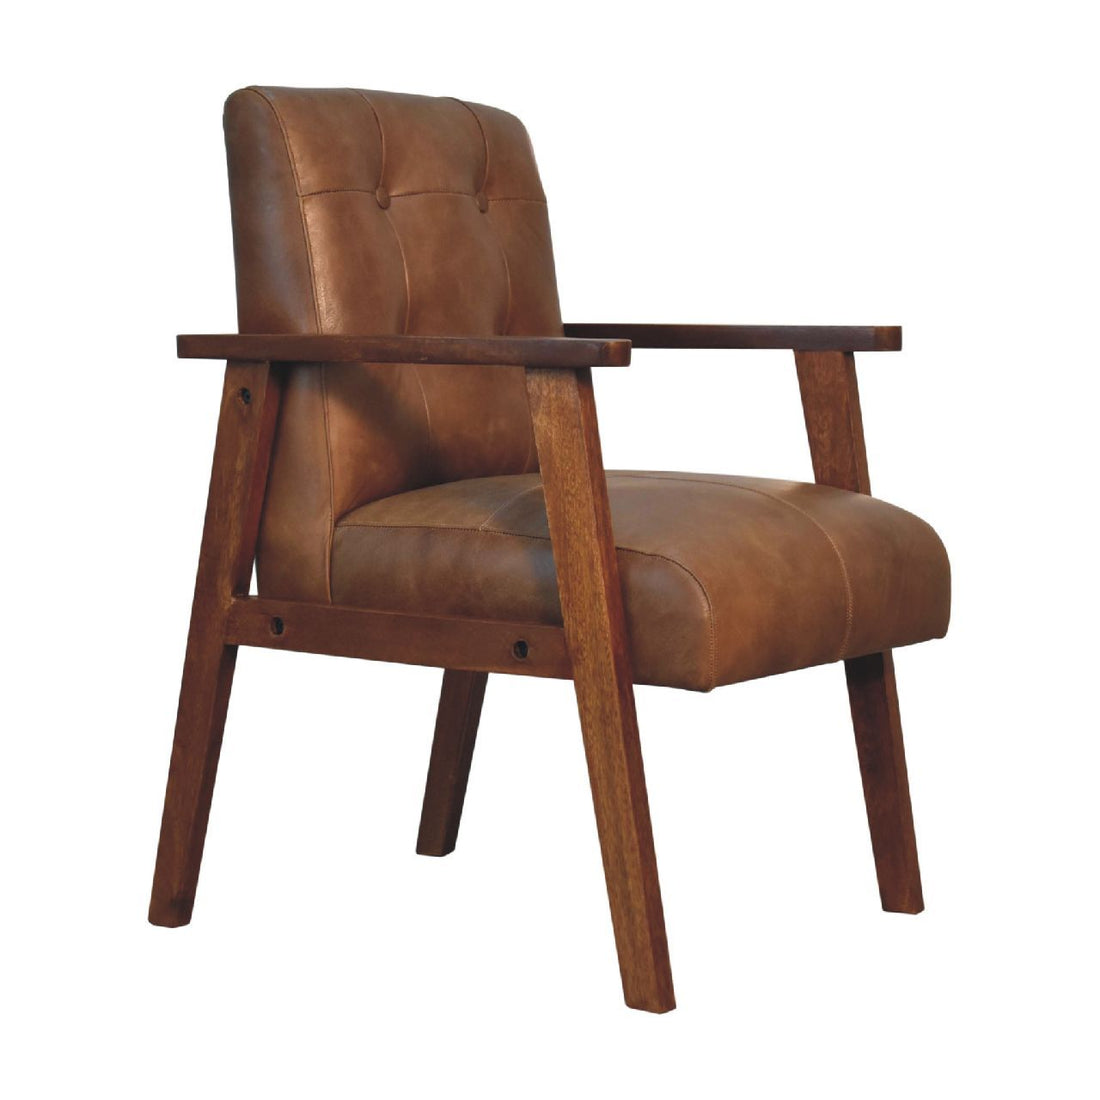 Brown Buffalo Leather Chair - Chestnut Leather